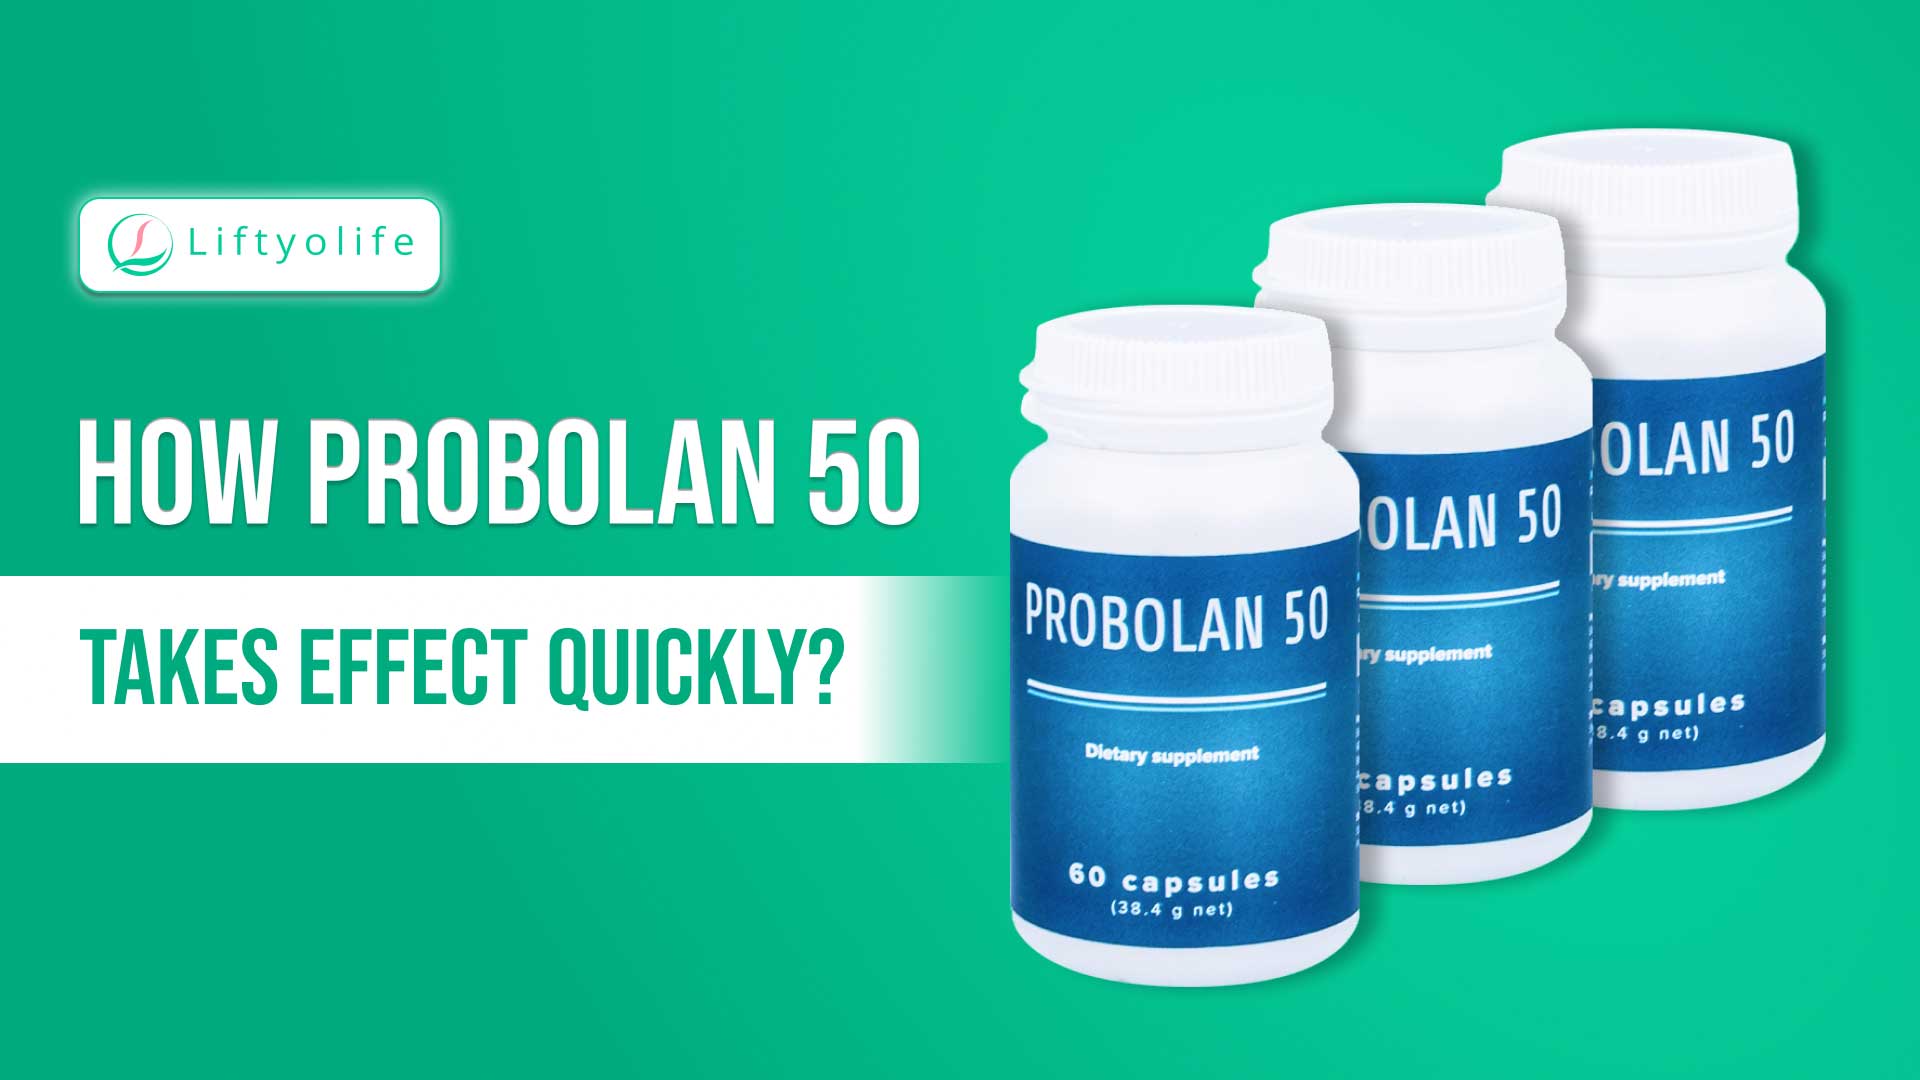 How Quickly Does Probolan 50 Take Effect?